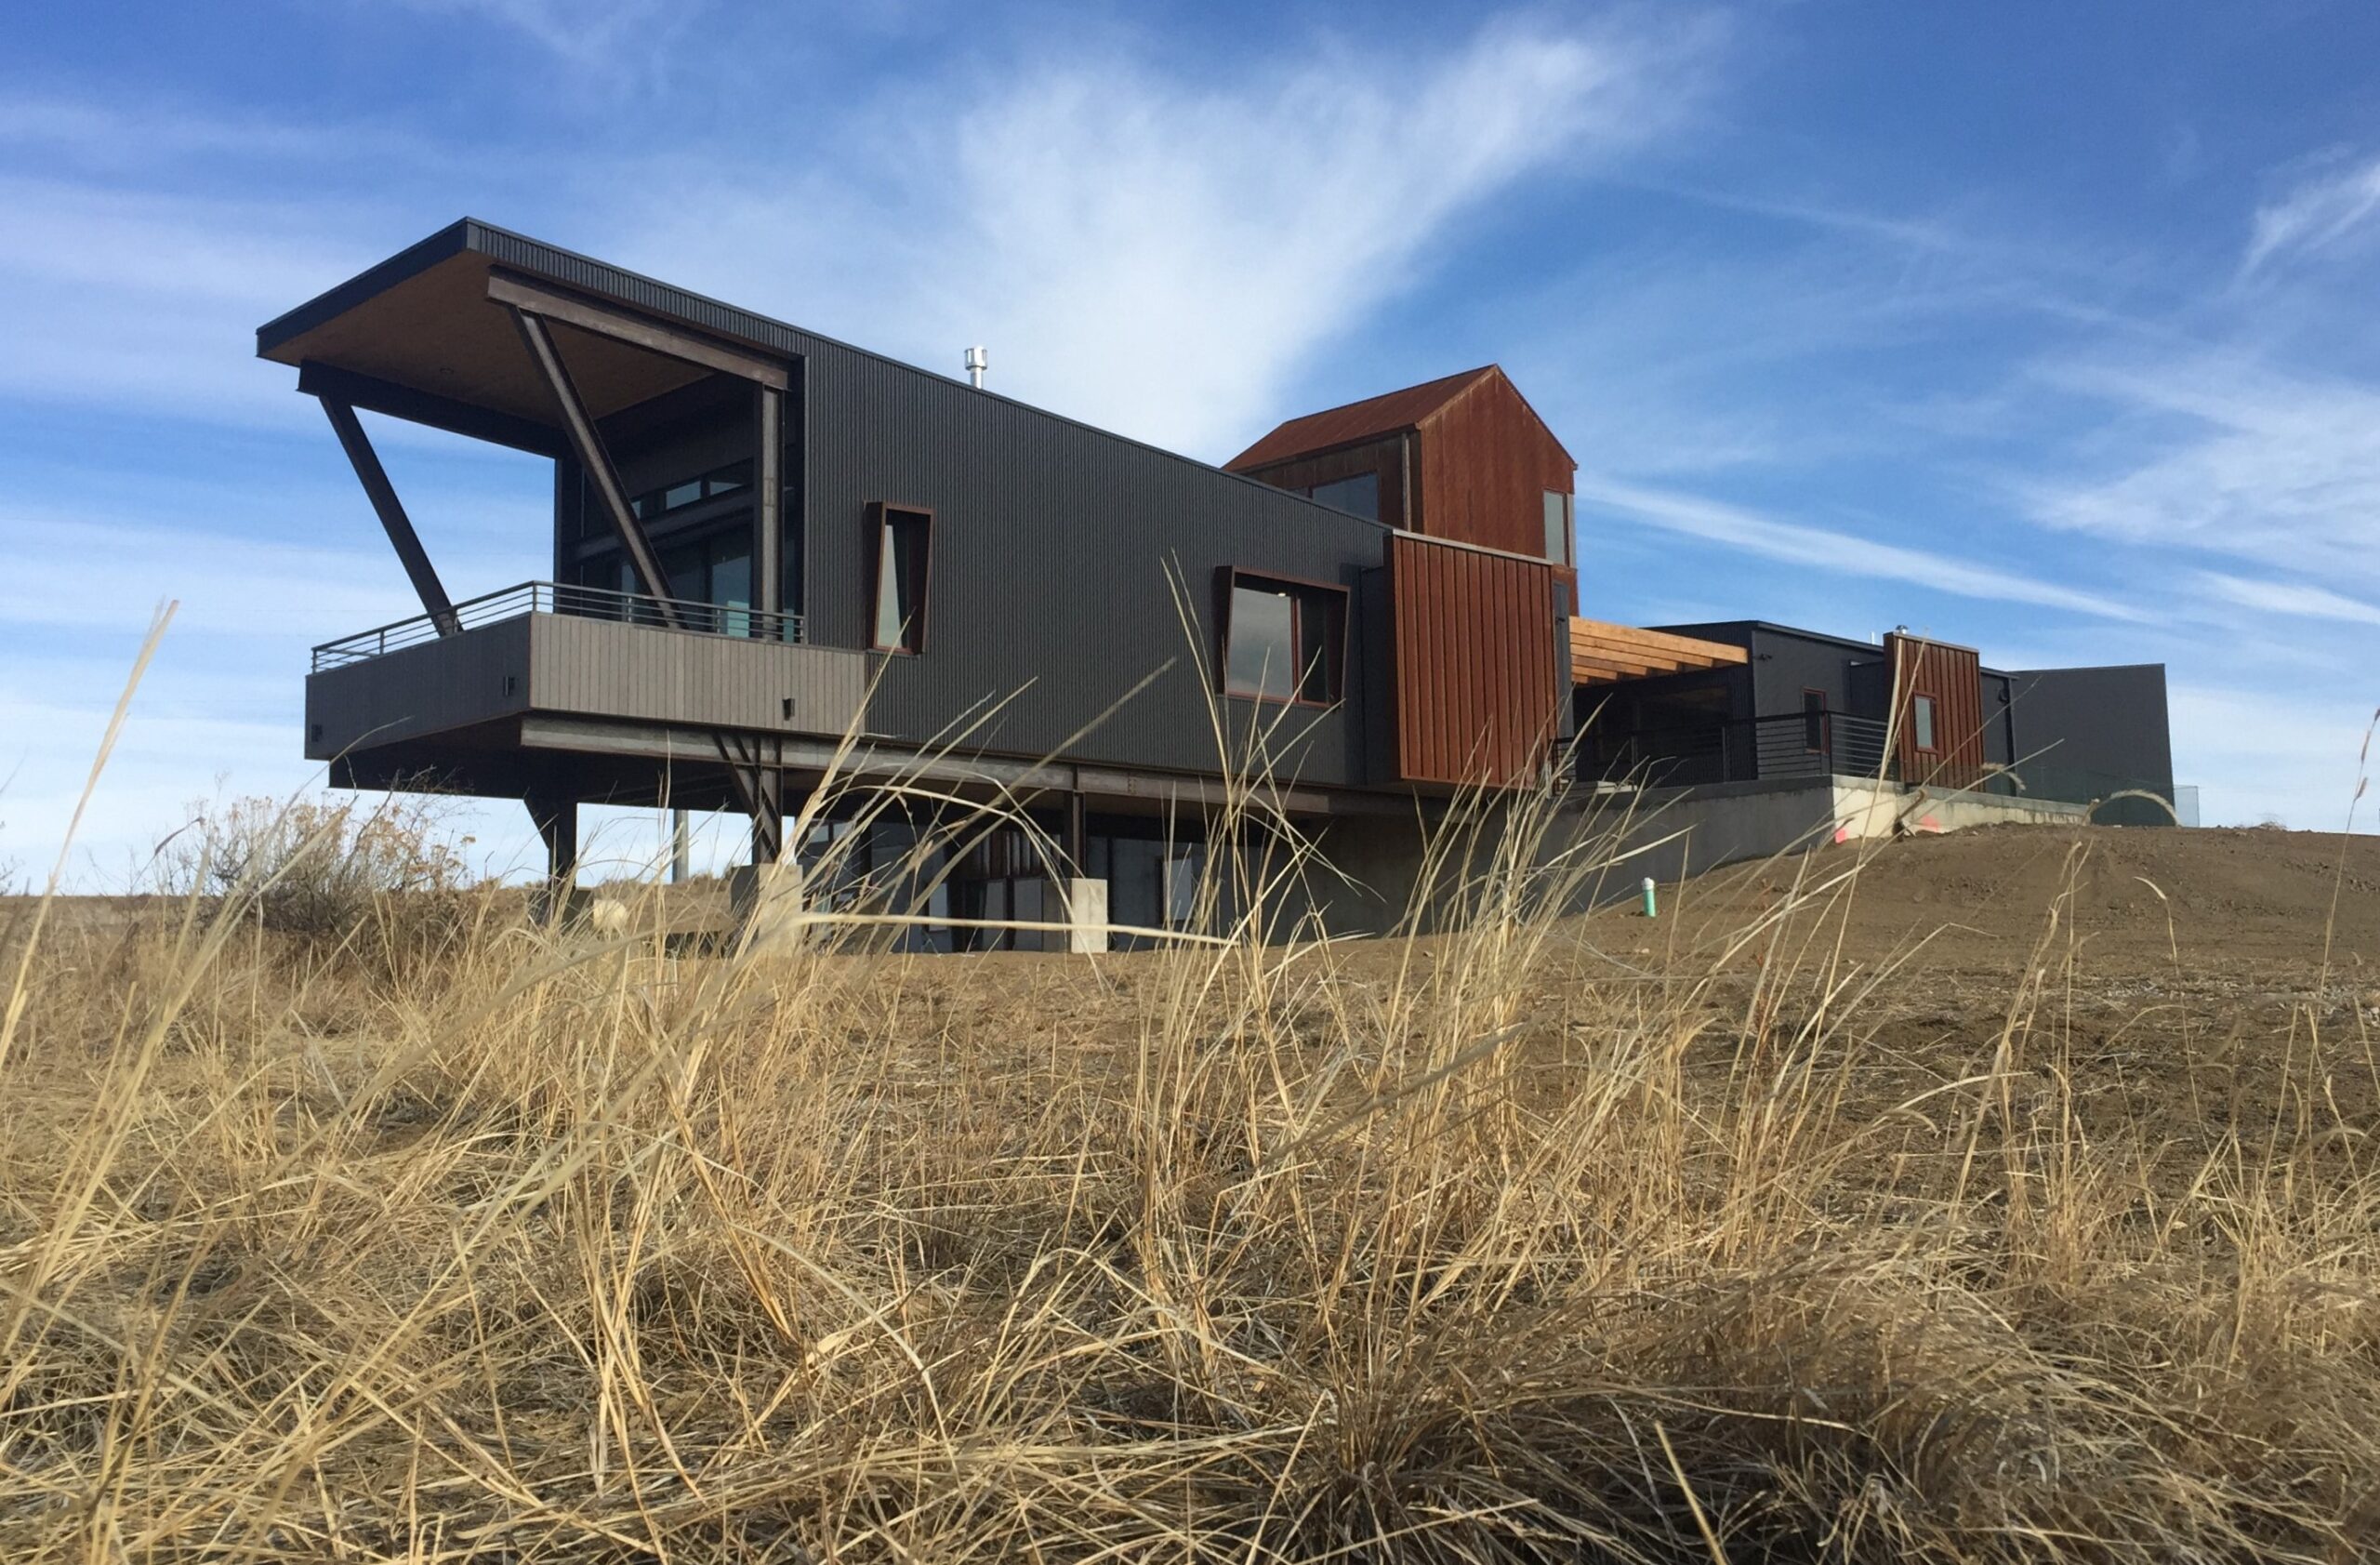 exterior view of modern house; dark siding and striking, cantilevered geometries; dense dry grass in foreground; blue sky in background - photo